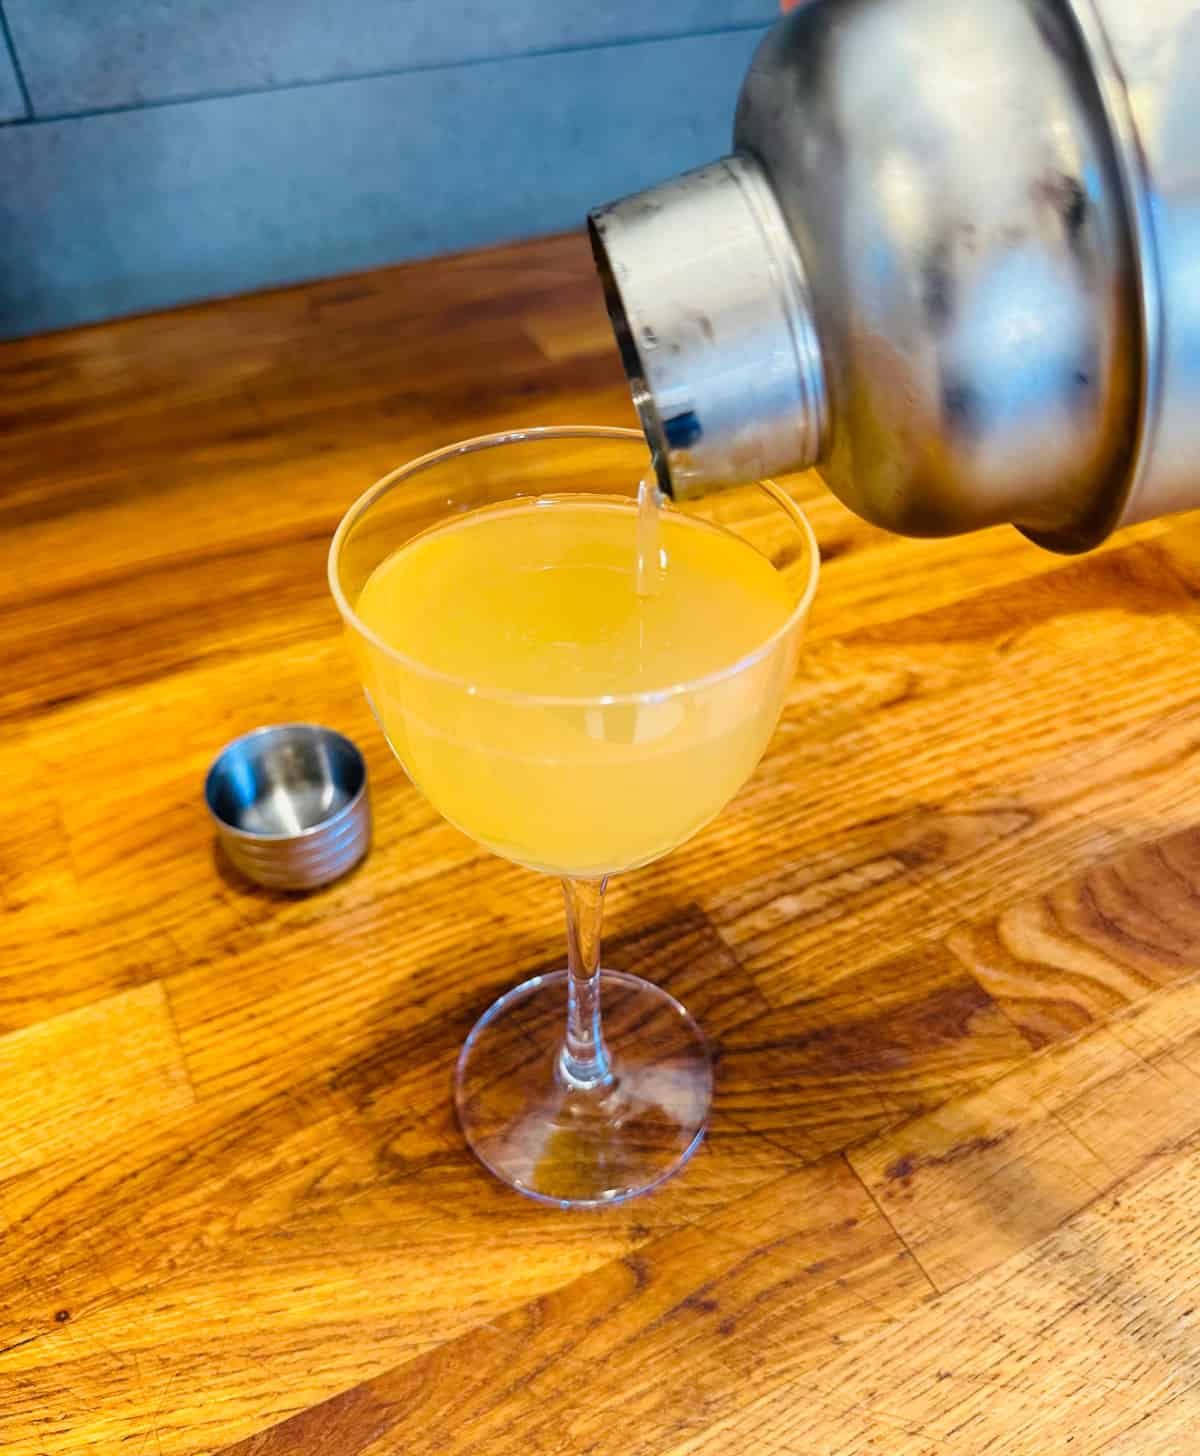 Pale yellow liquid being poured from a cocktail shaker into a coupe glass.